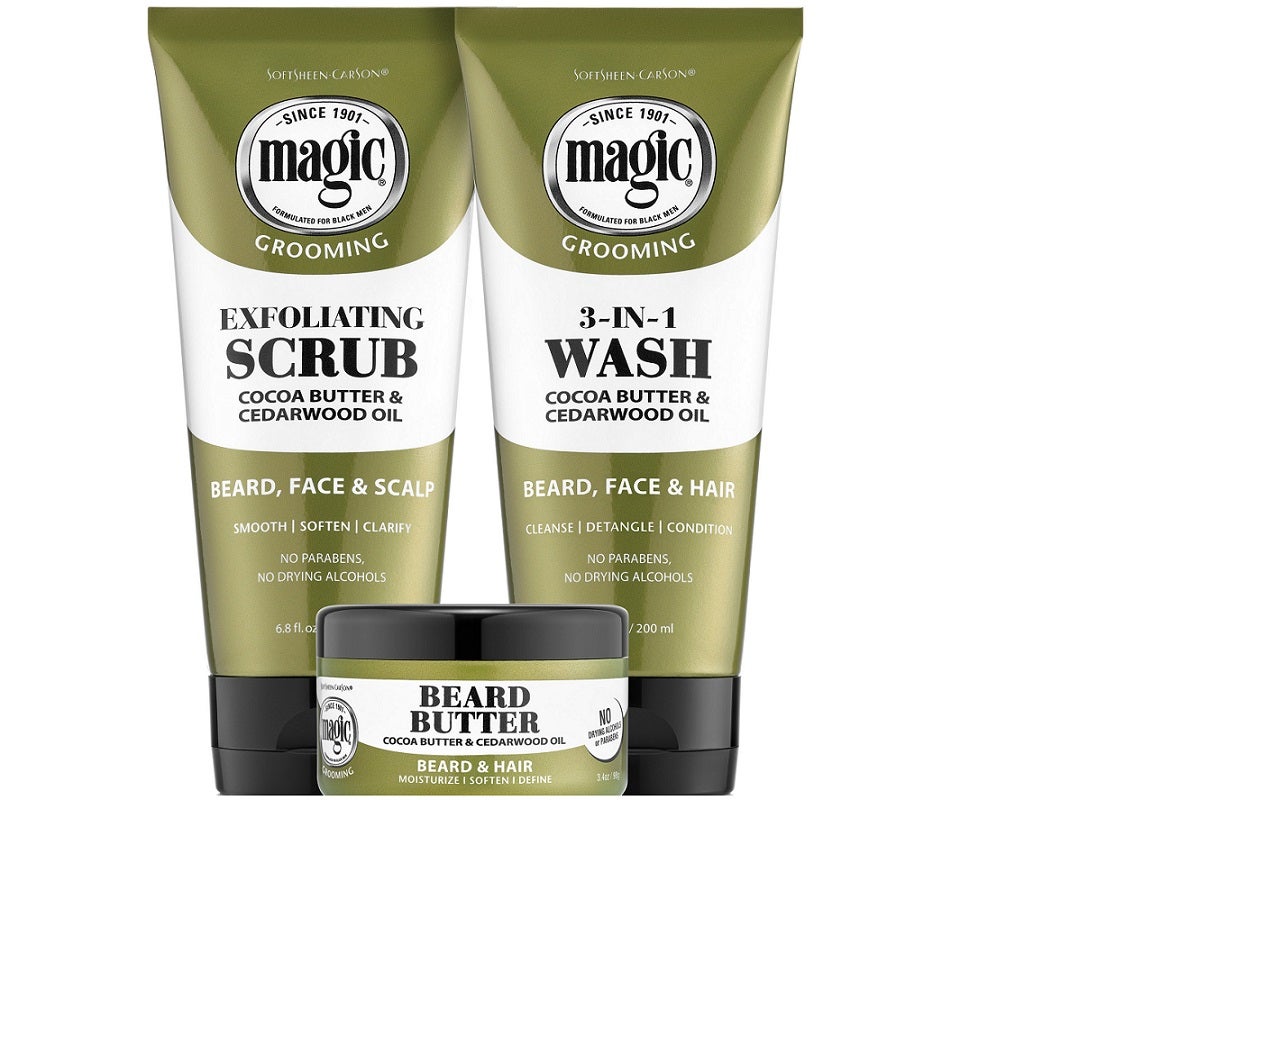 Magic Grooming Collection